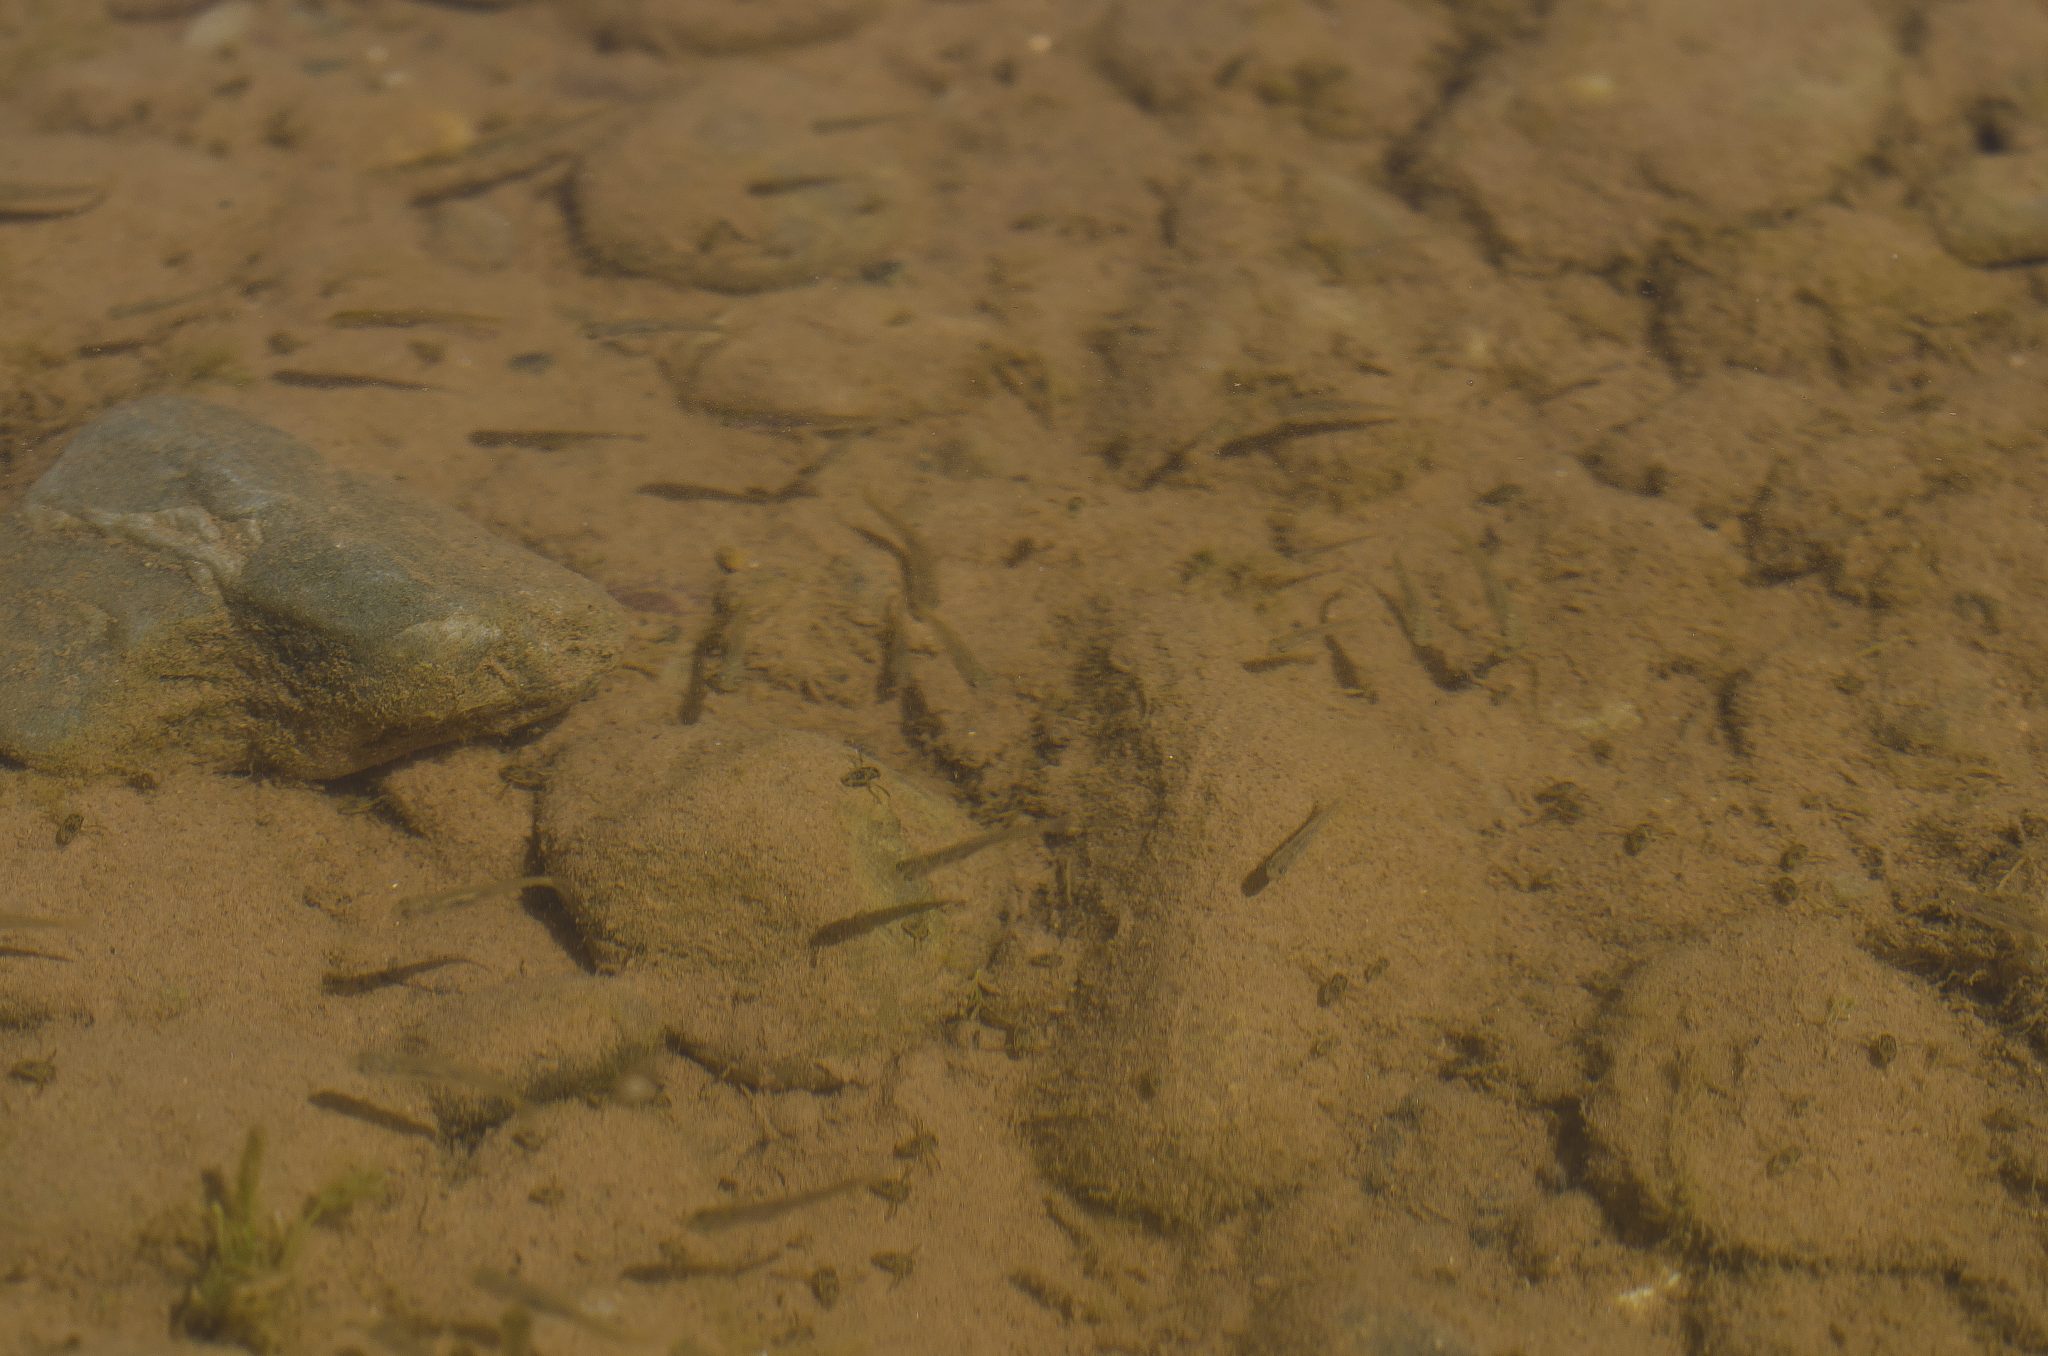 Minnows swimming around muddy green river water in the spring.